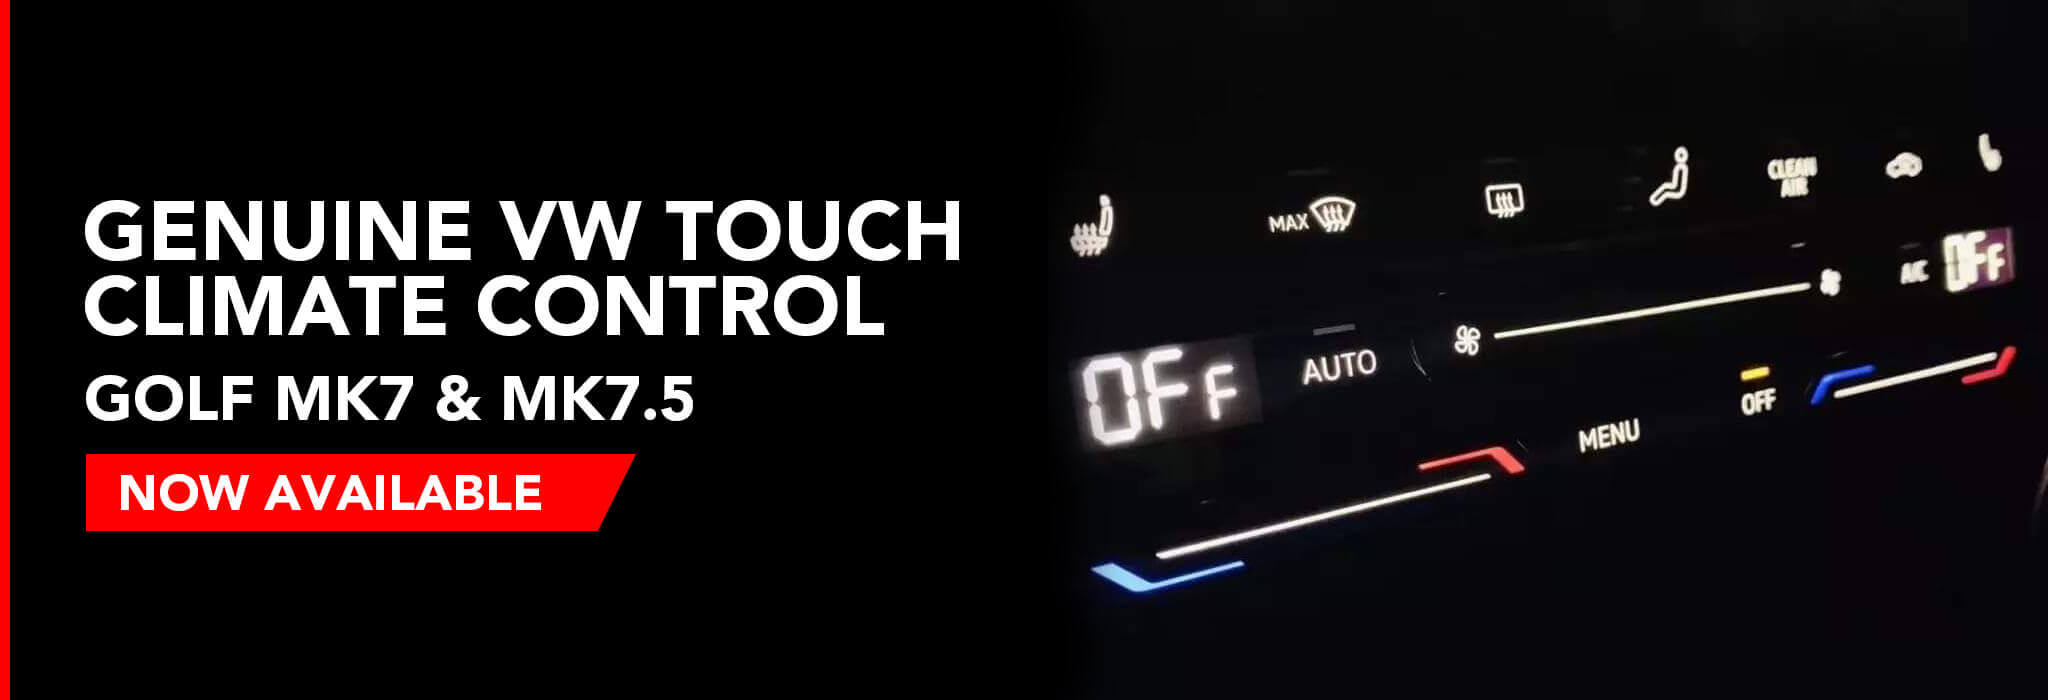 Genuine VW Touch Climate Control full set